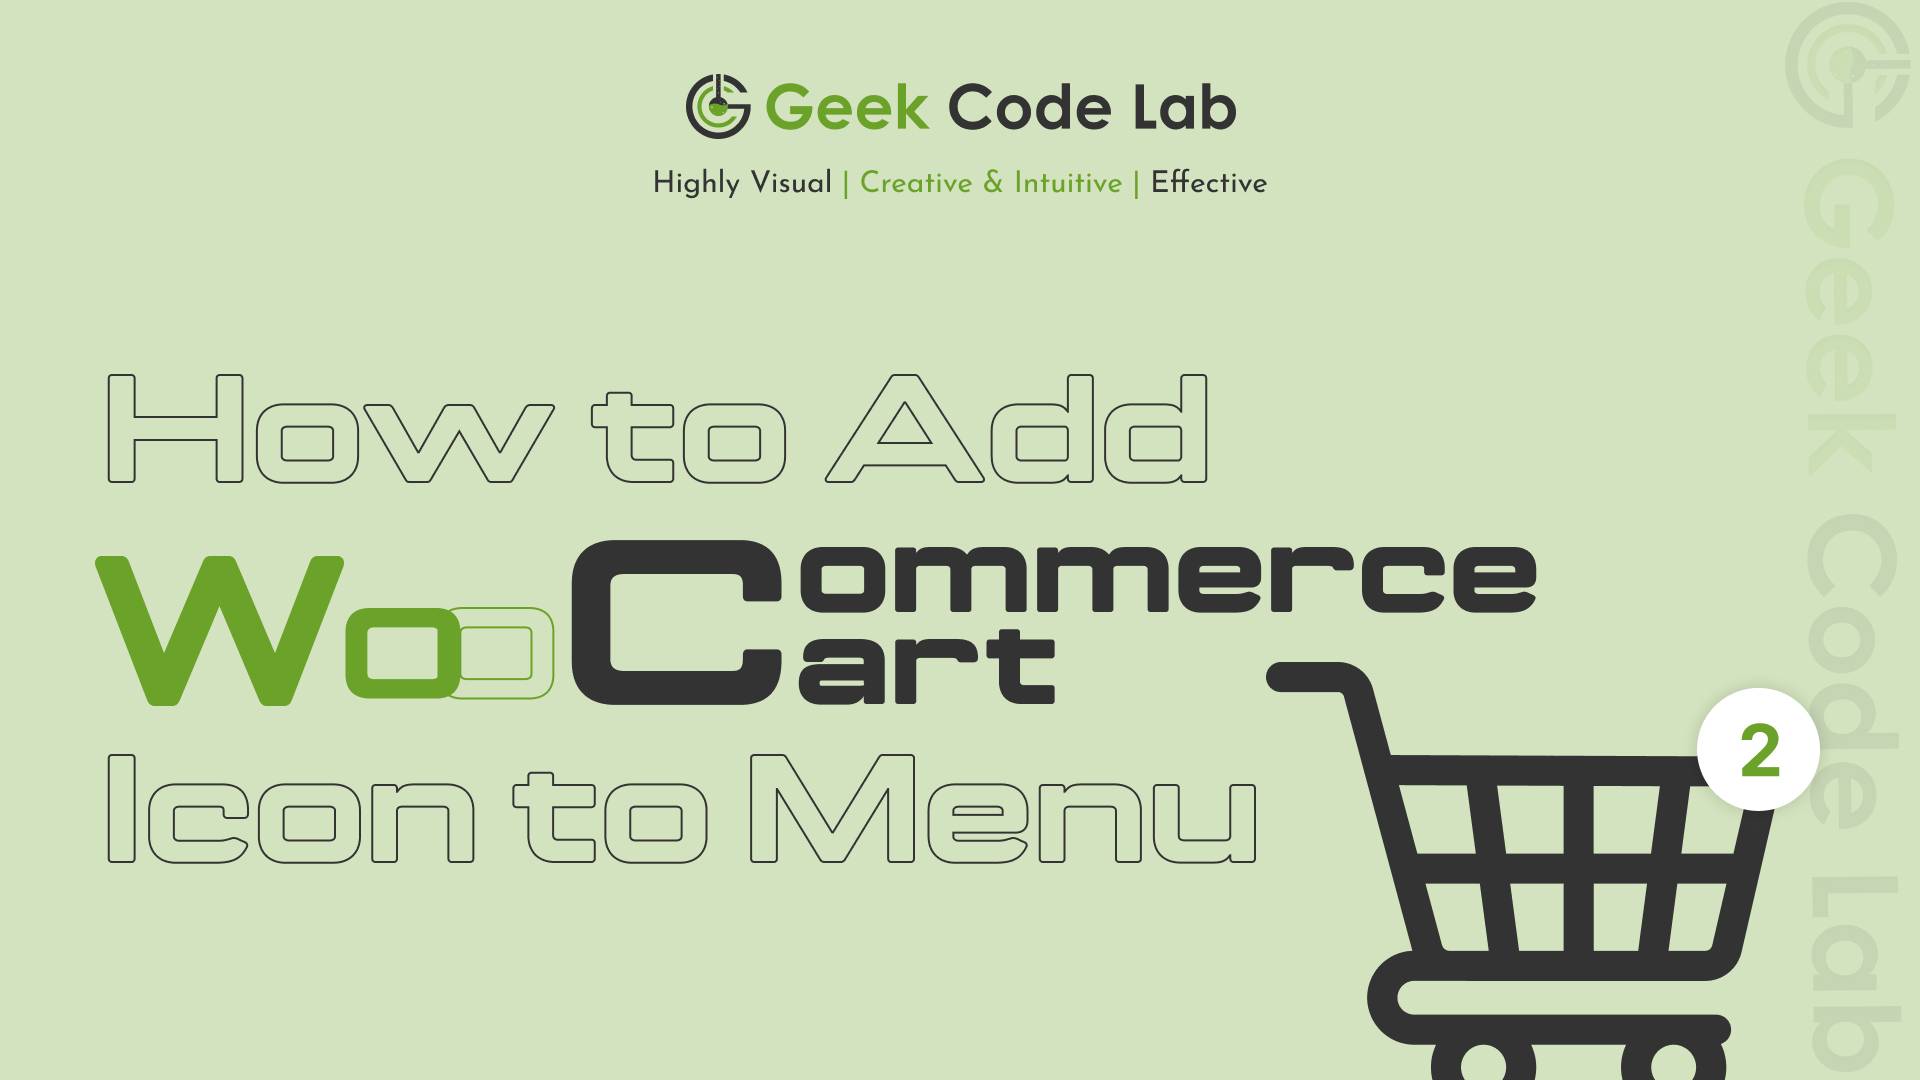 How to Add WooCommerce Cart icon to Menu – Step by Step Guide